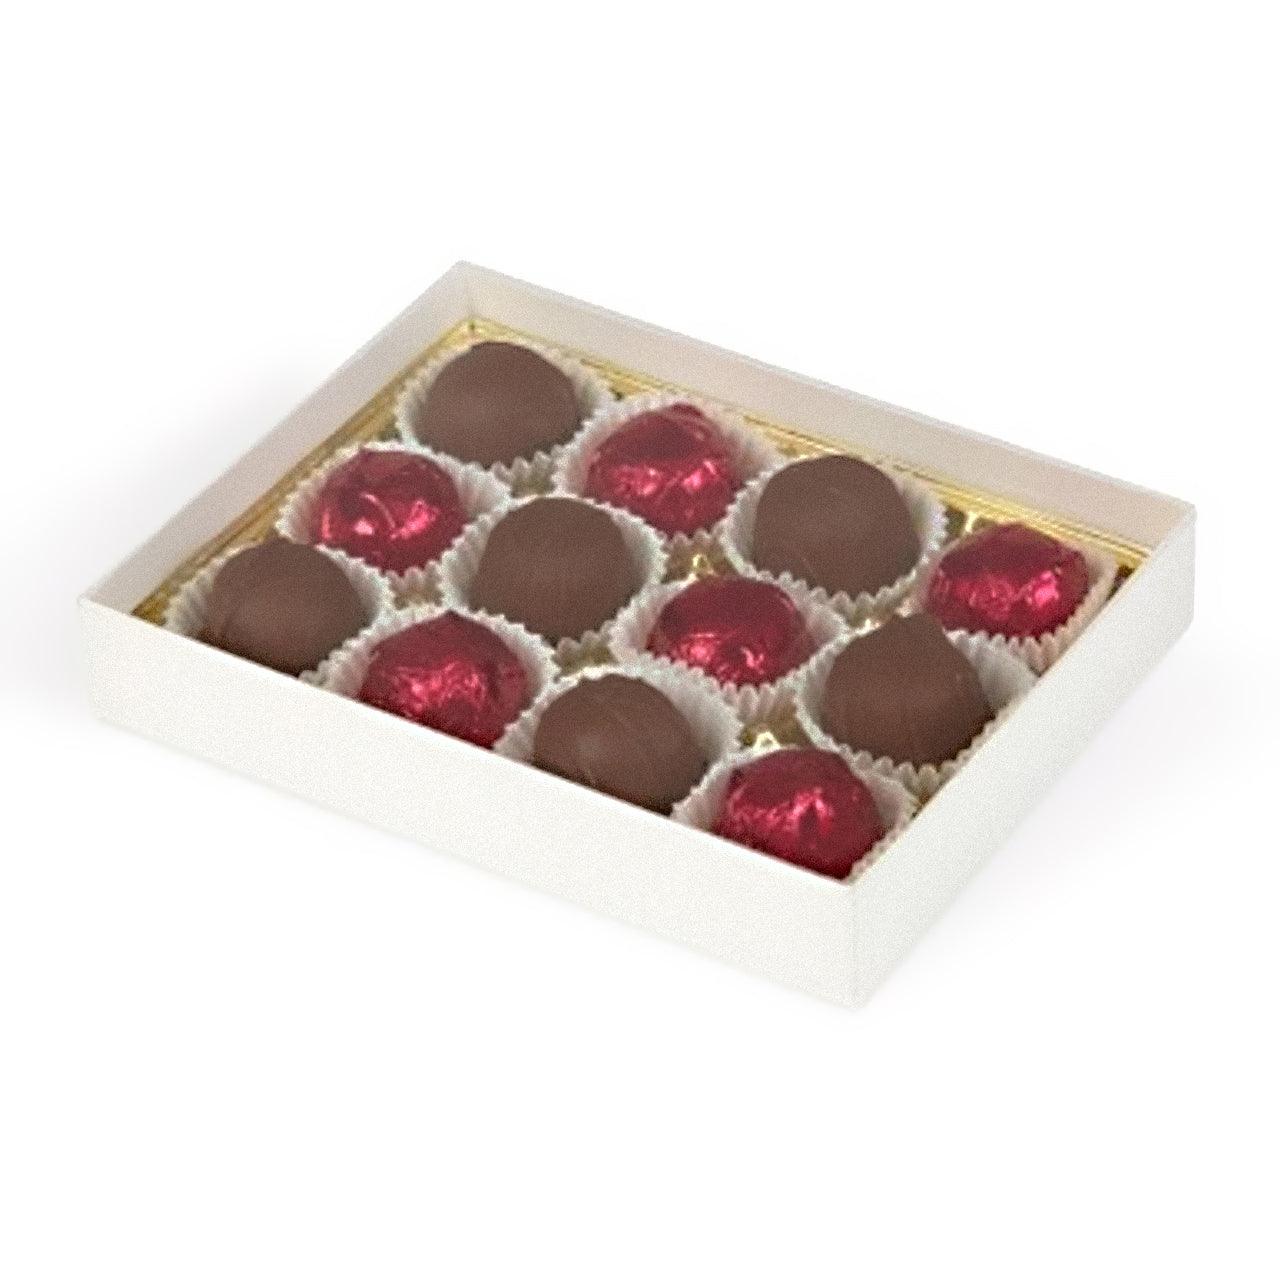 Large Single Layer White Box for 12 Candies - ViaCheff.com